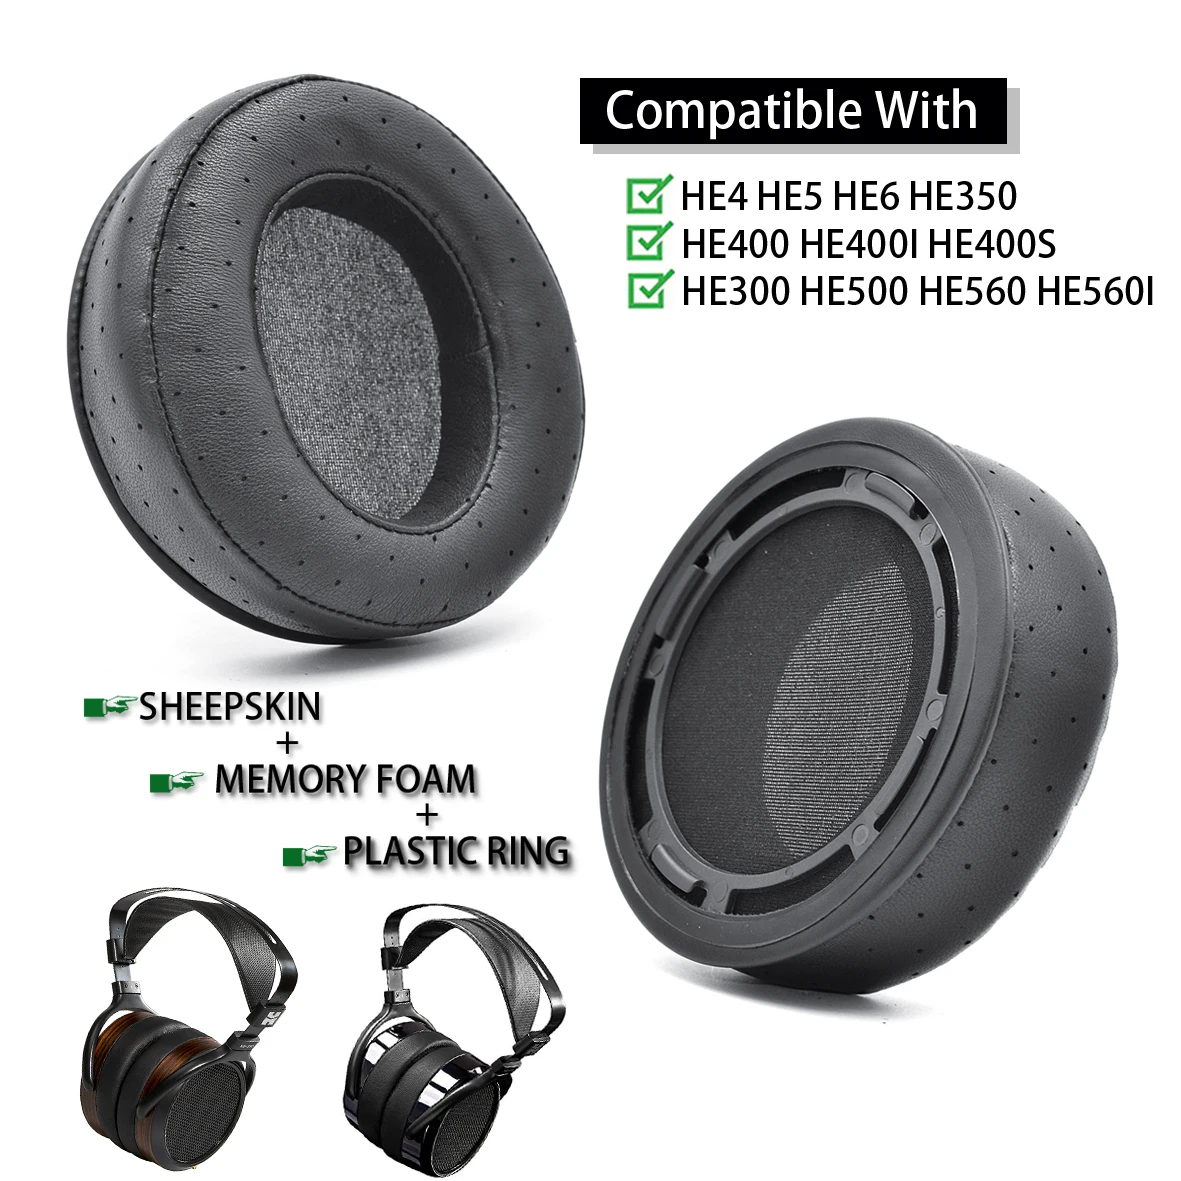 

Thicker Softer Cushion Ear Pads For HIFIMAN HE300 HE400 HE400i HE500 HE560, HE6 HE4 HE-5LE HE-5 HEADPHONES